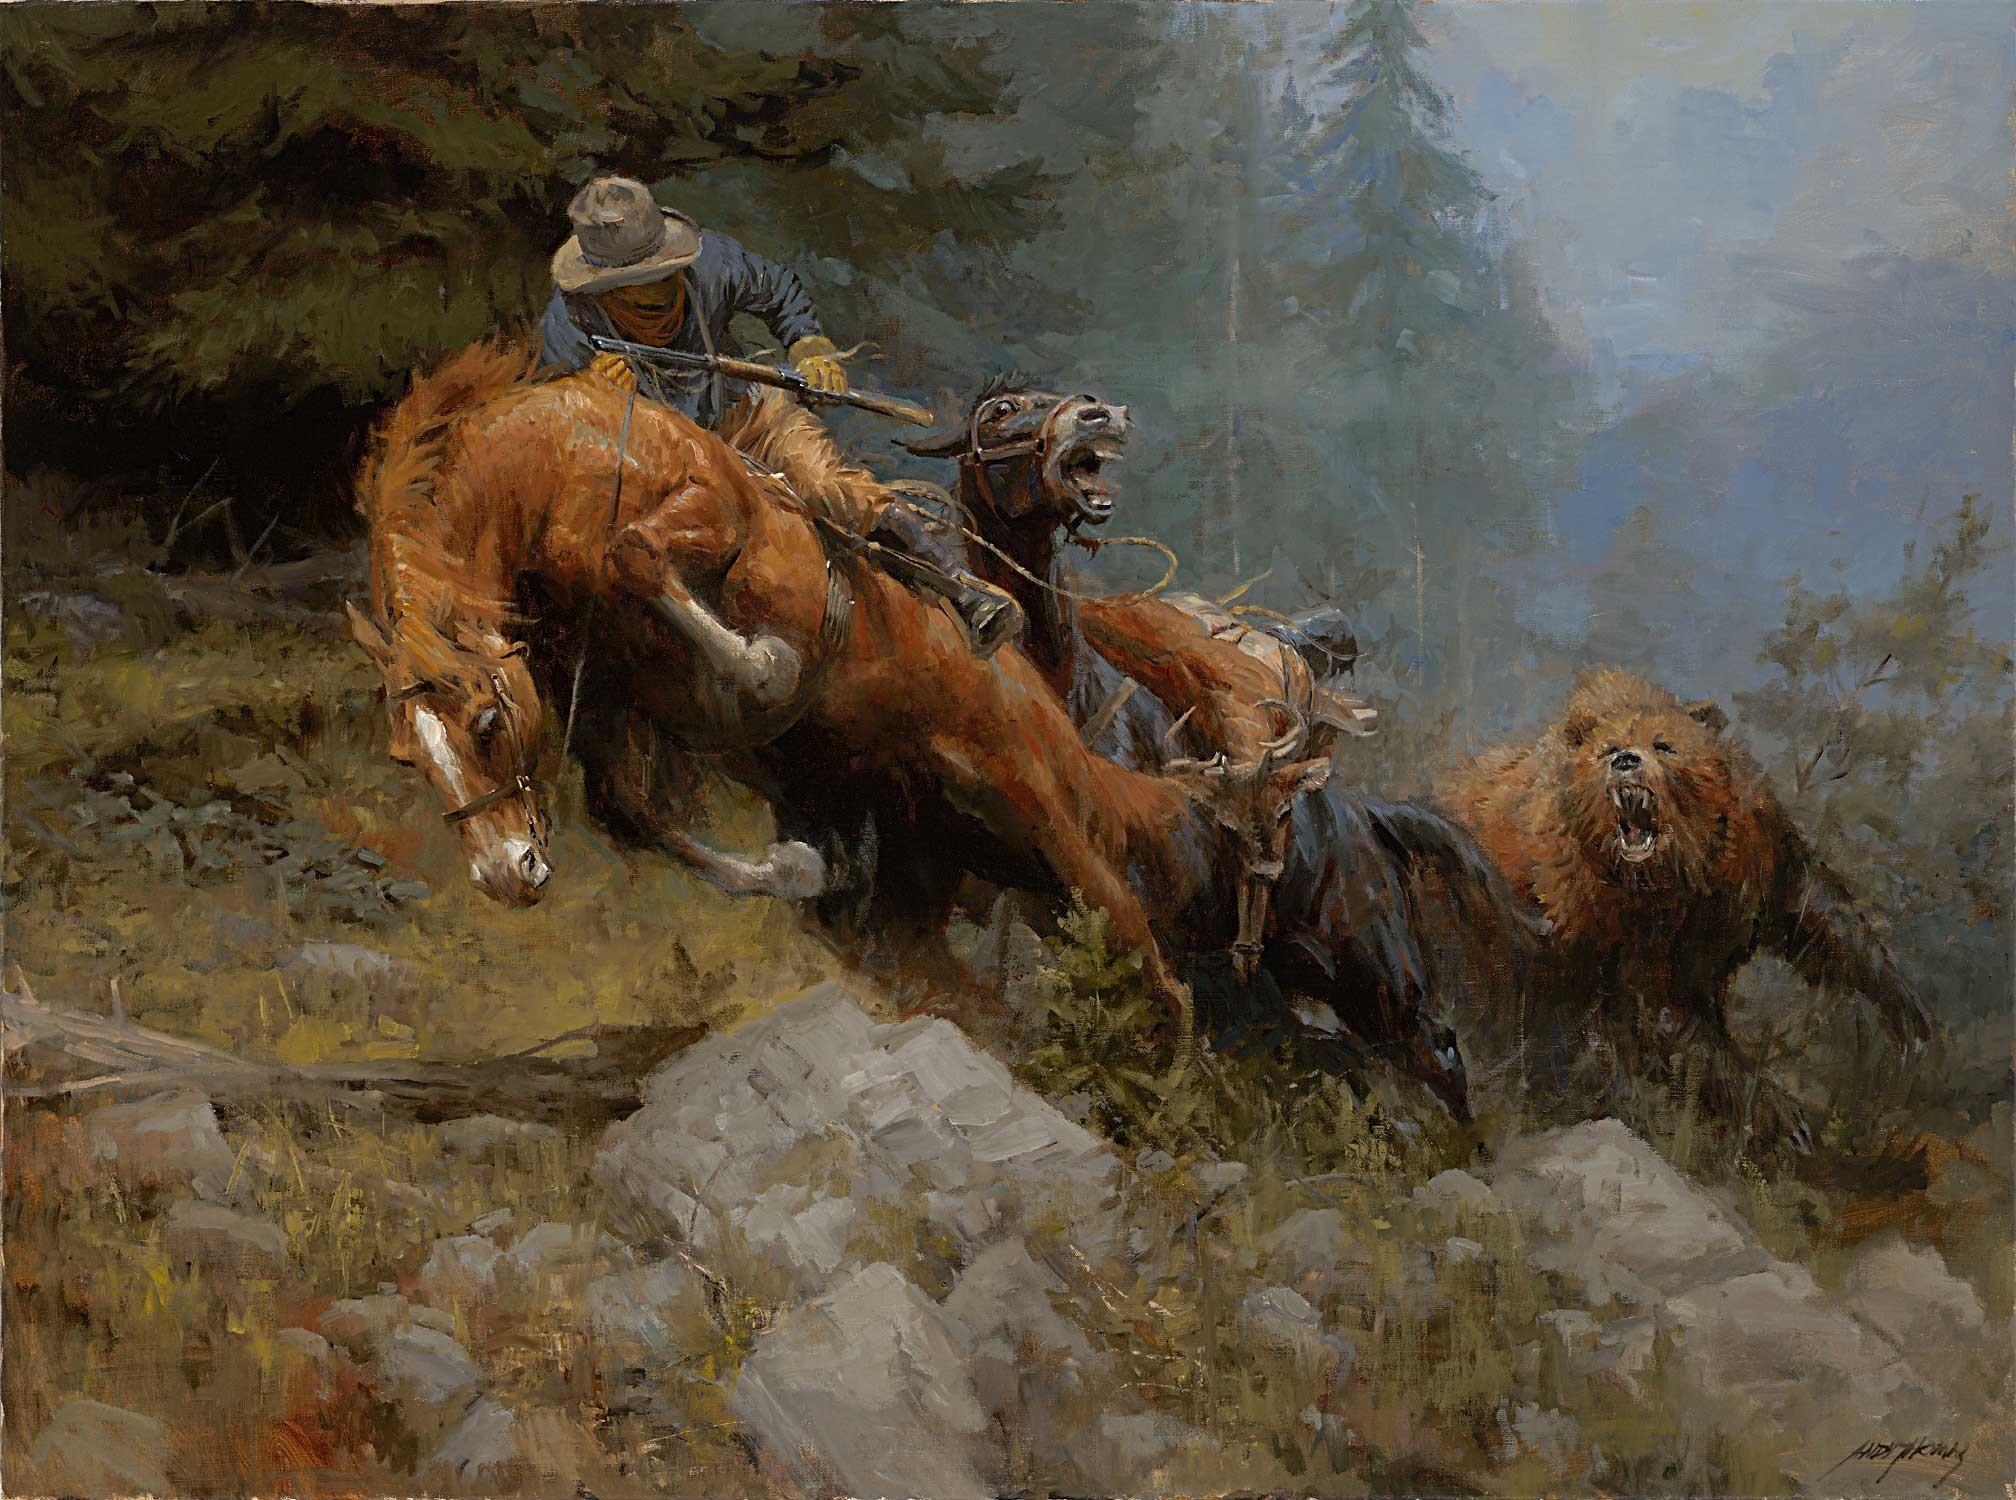 2016x1500 For anyone who played Red Dead Redemption this painting/wallpaper reminds  me of the northern